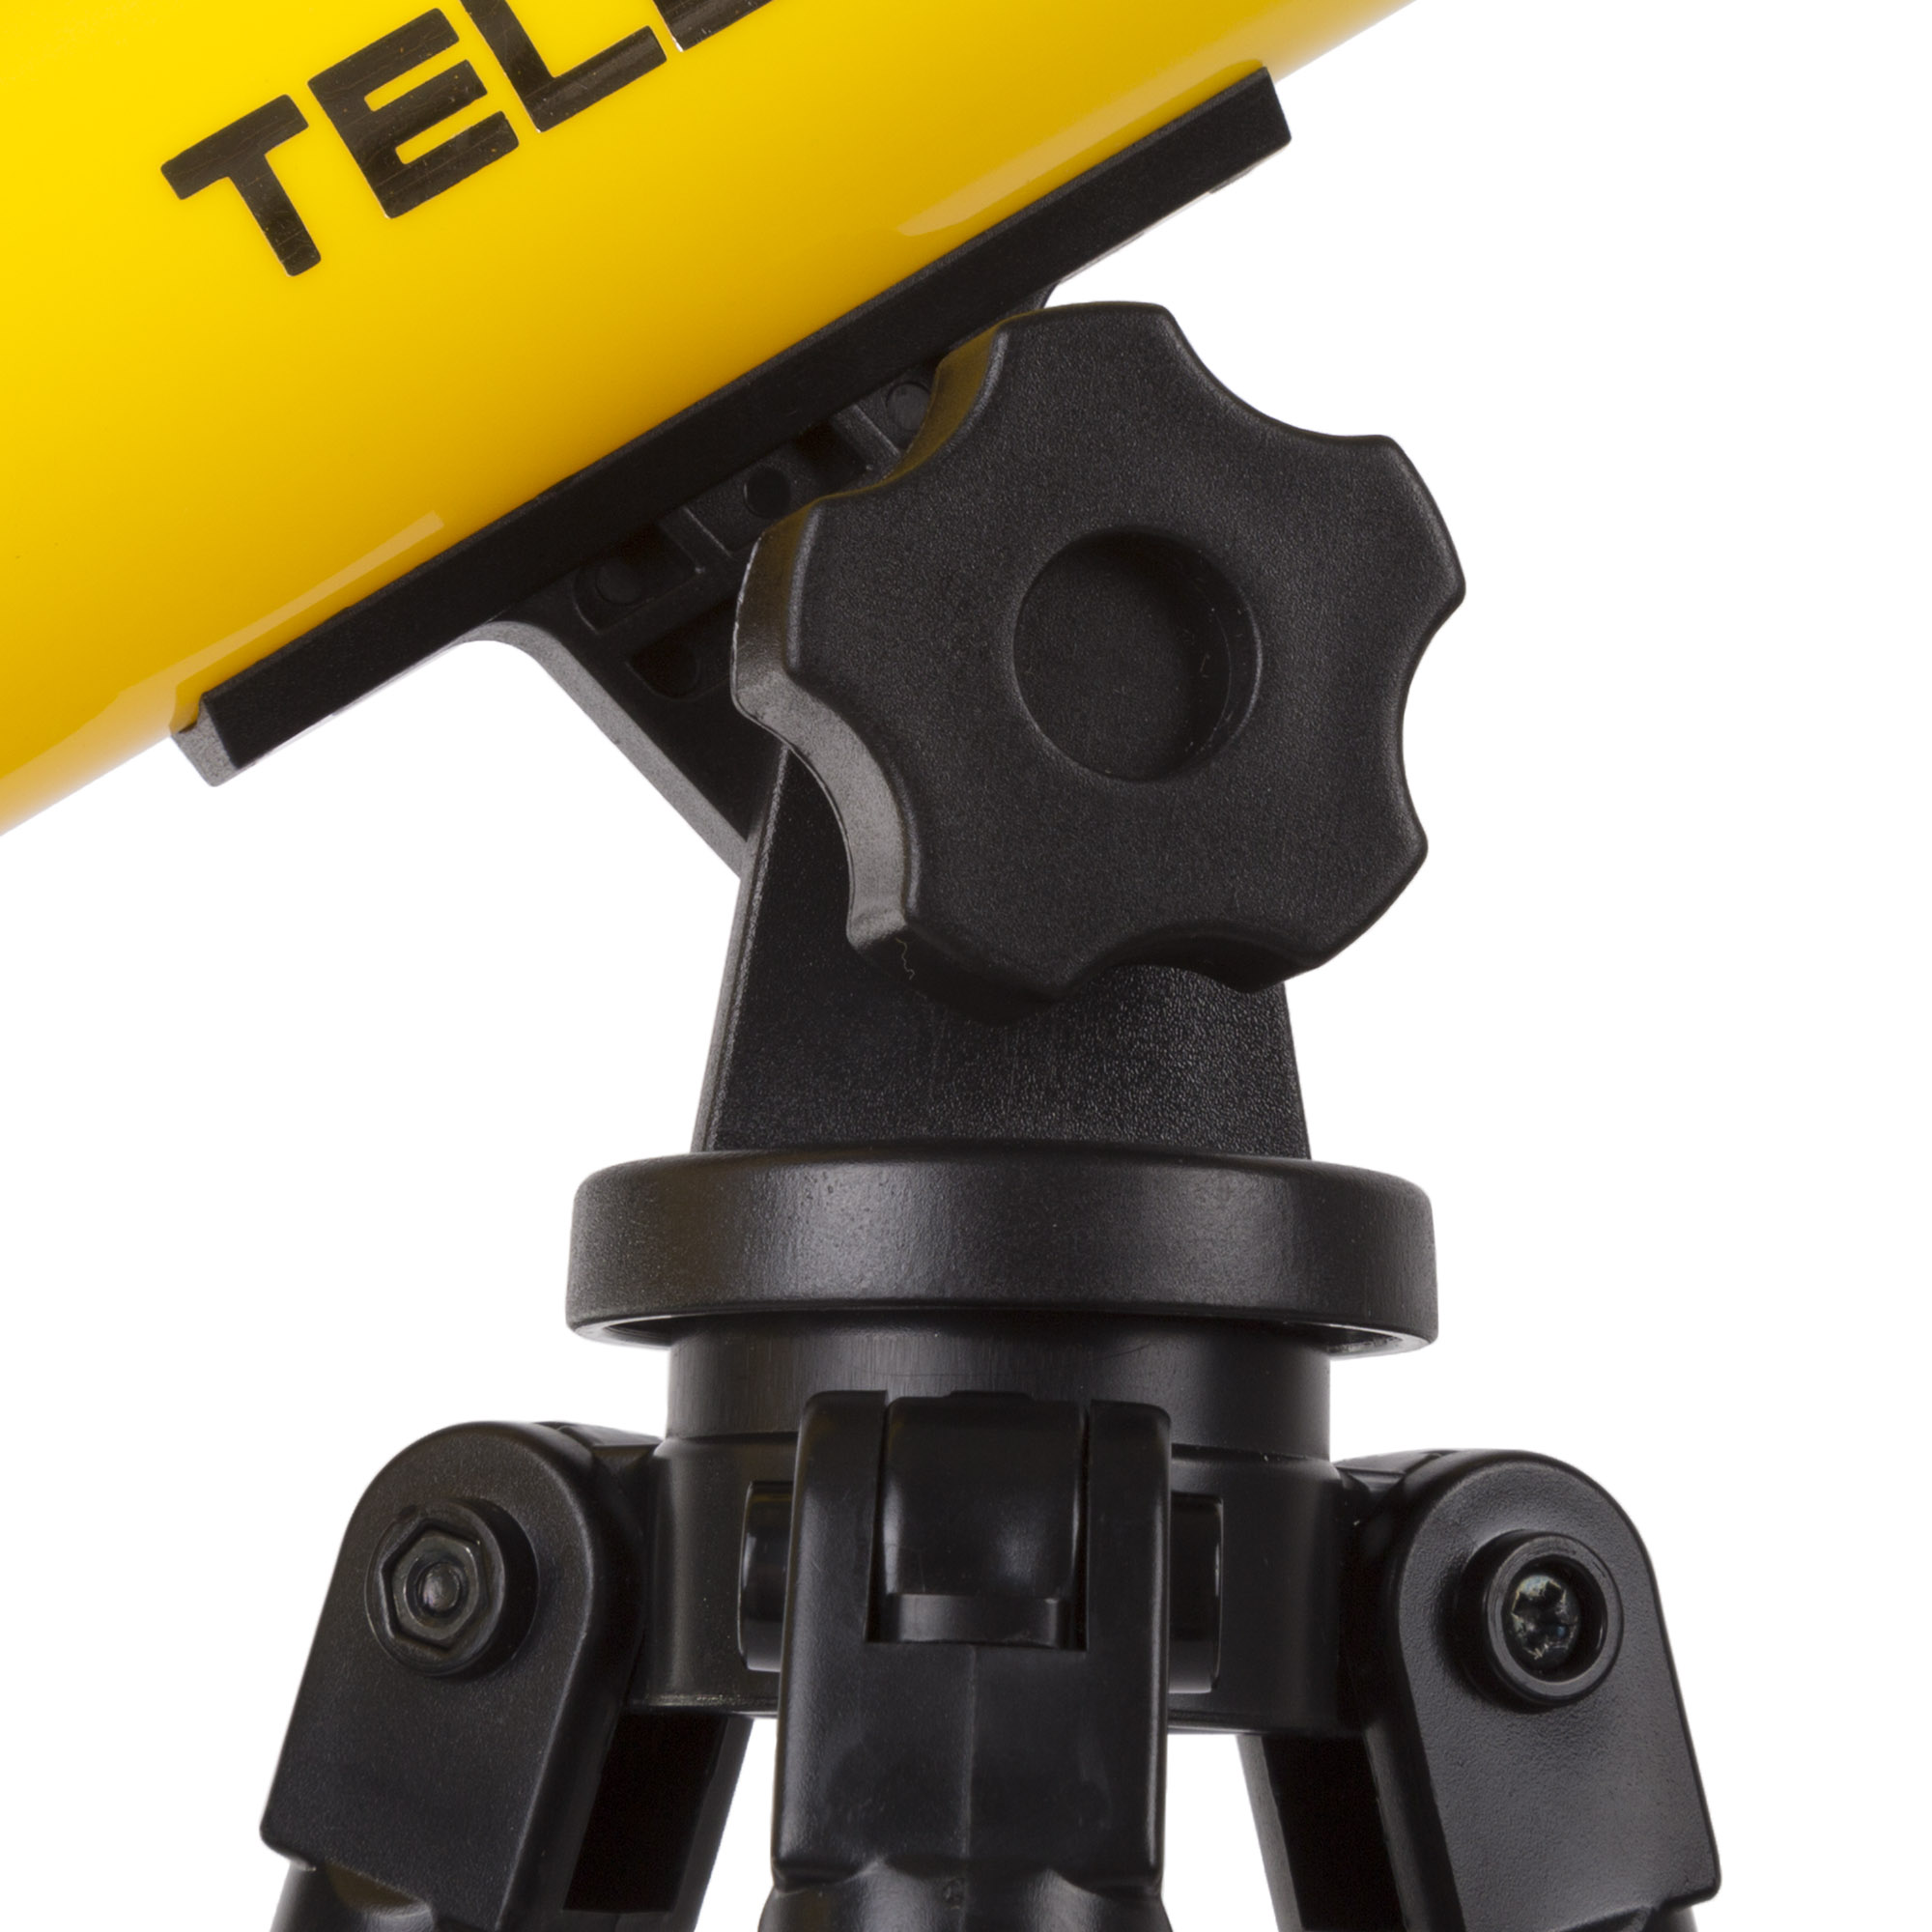 Telescope for Kids - 30x Magnification by Hey! Play! - image 3 of 4